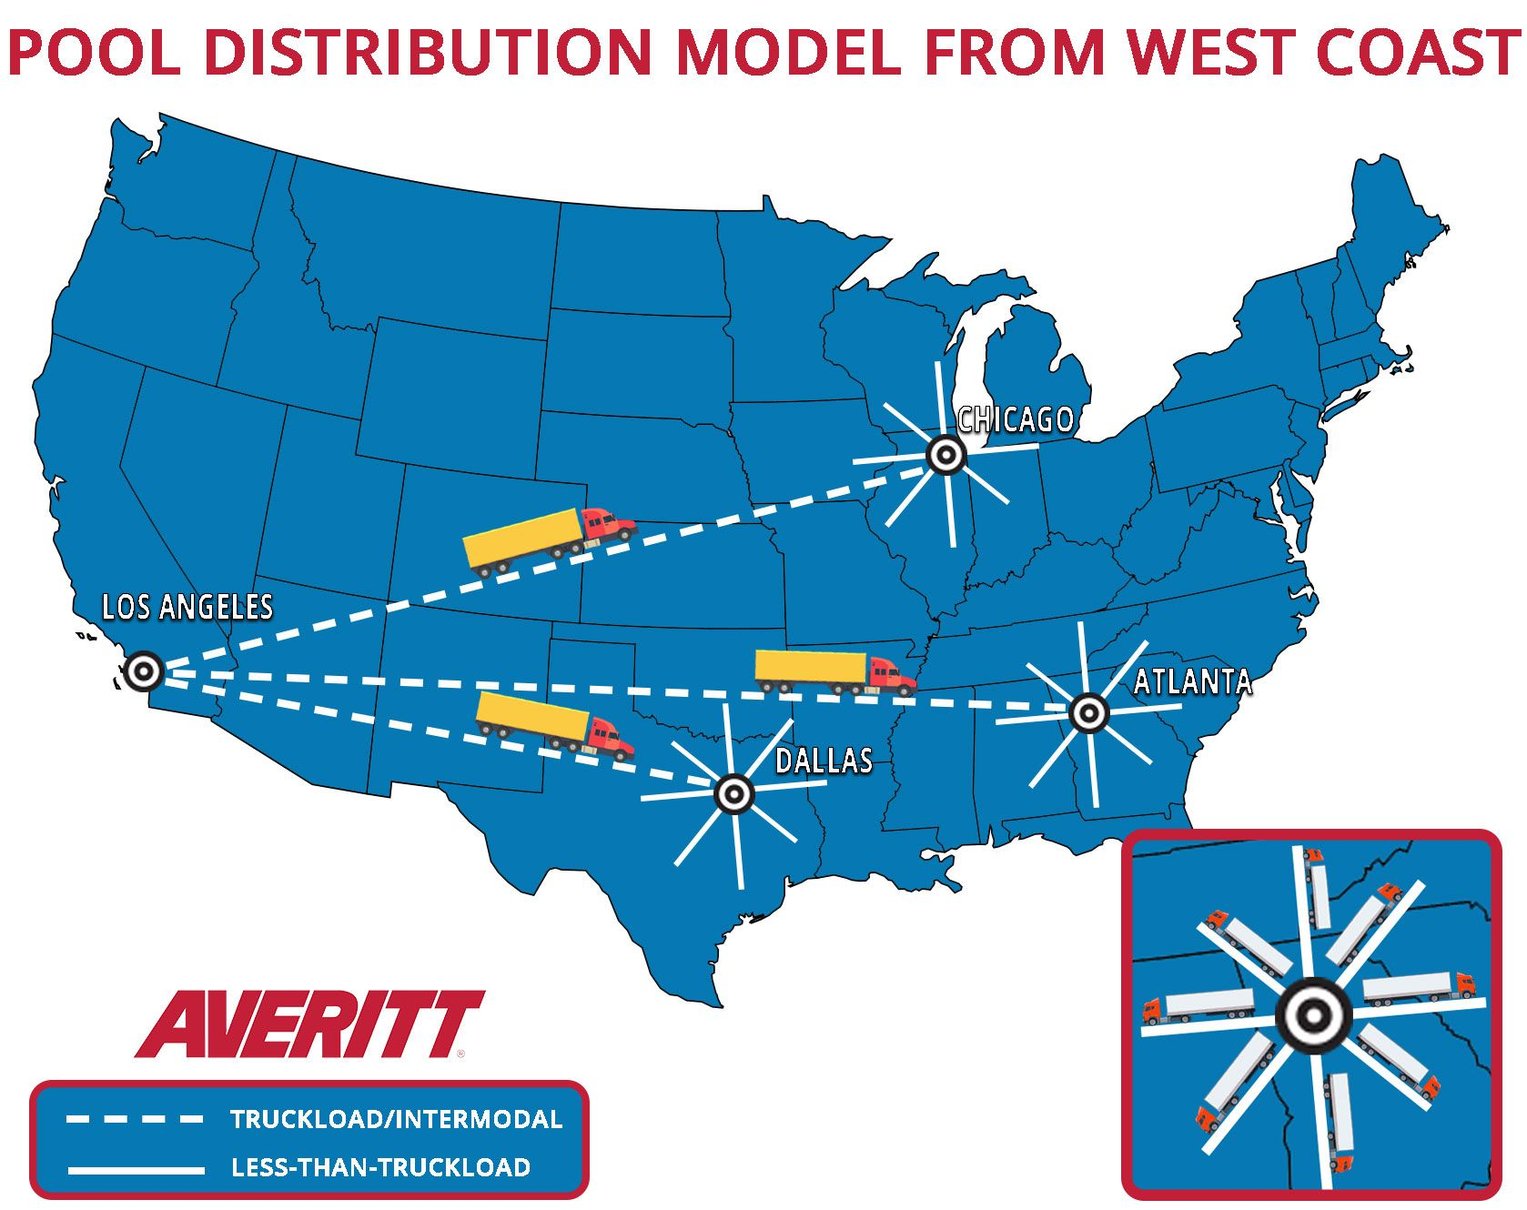 Example of a pool distribution supply chain strategy from the West Coast 